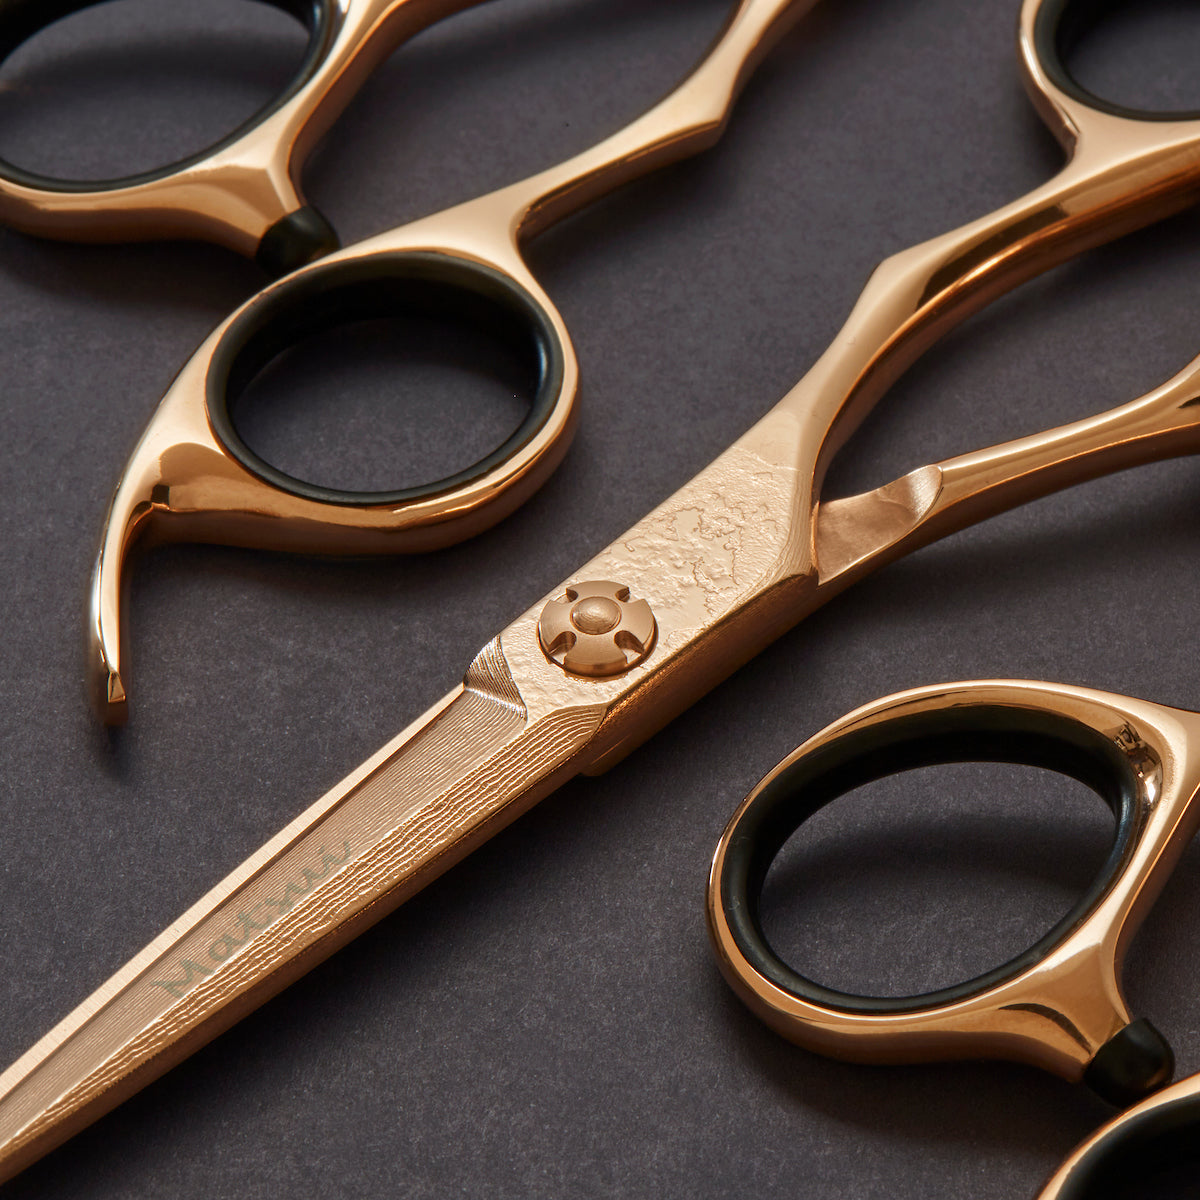 What is the difference between Japanese and German scissors?